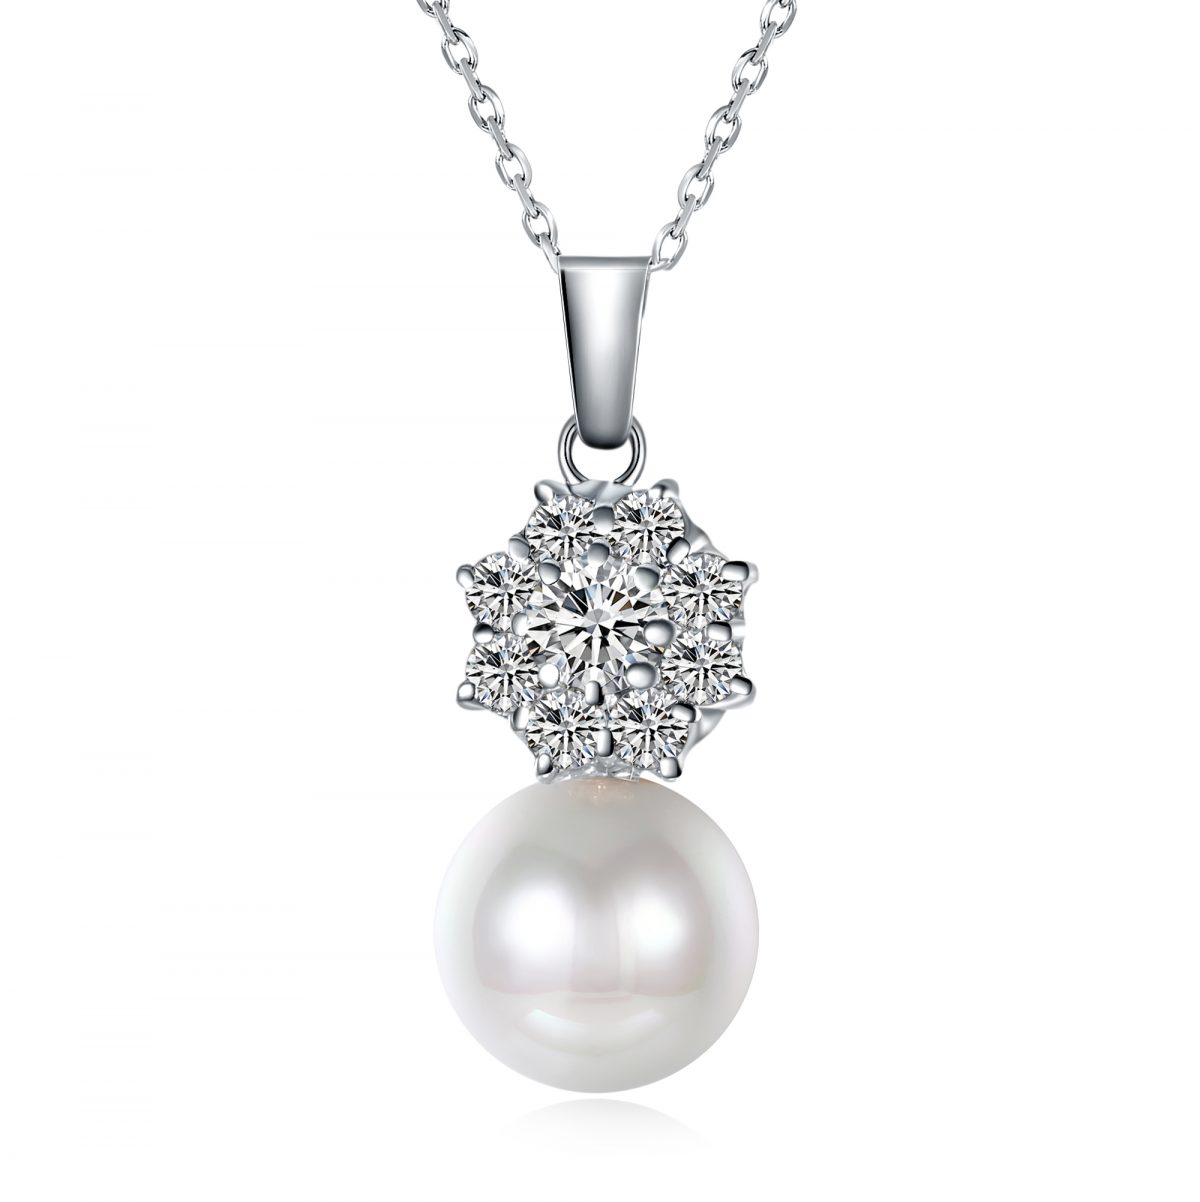 Angelic Pearl Pendant - White Gold